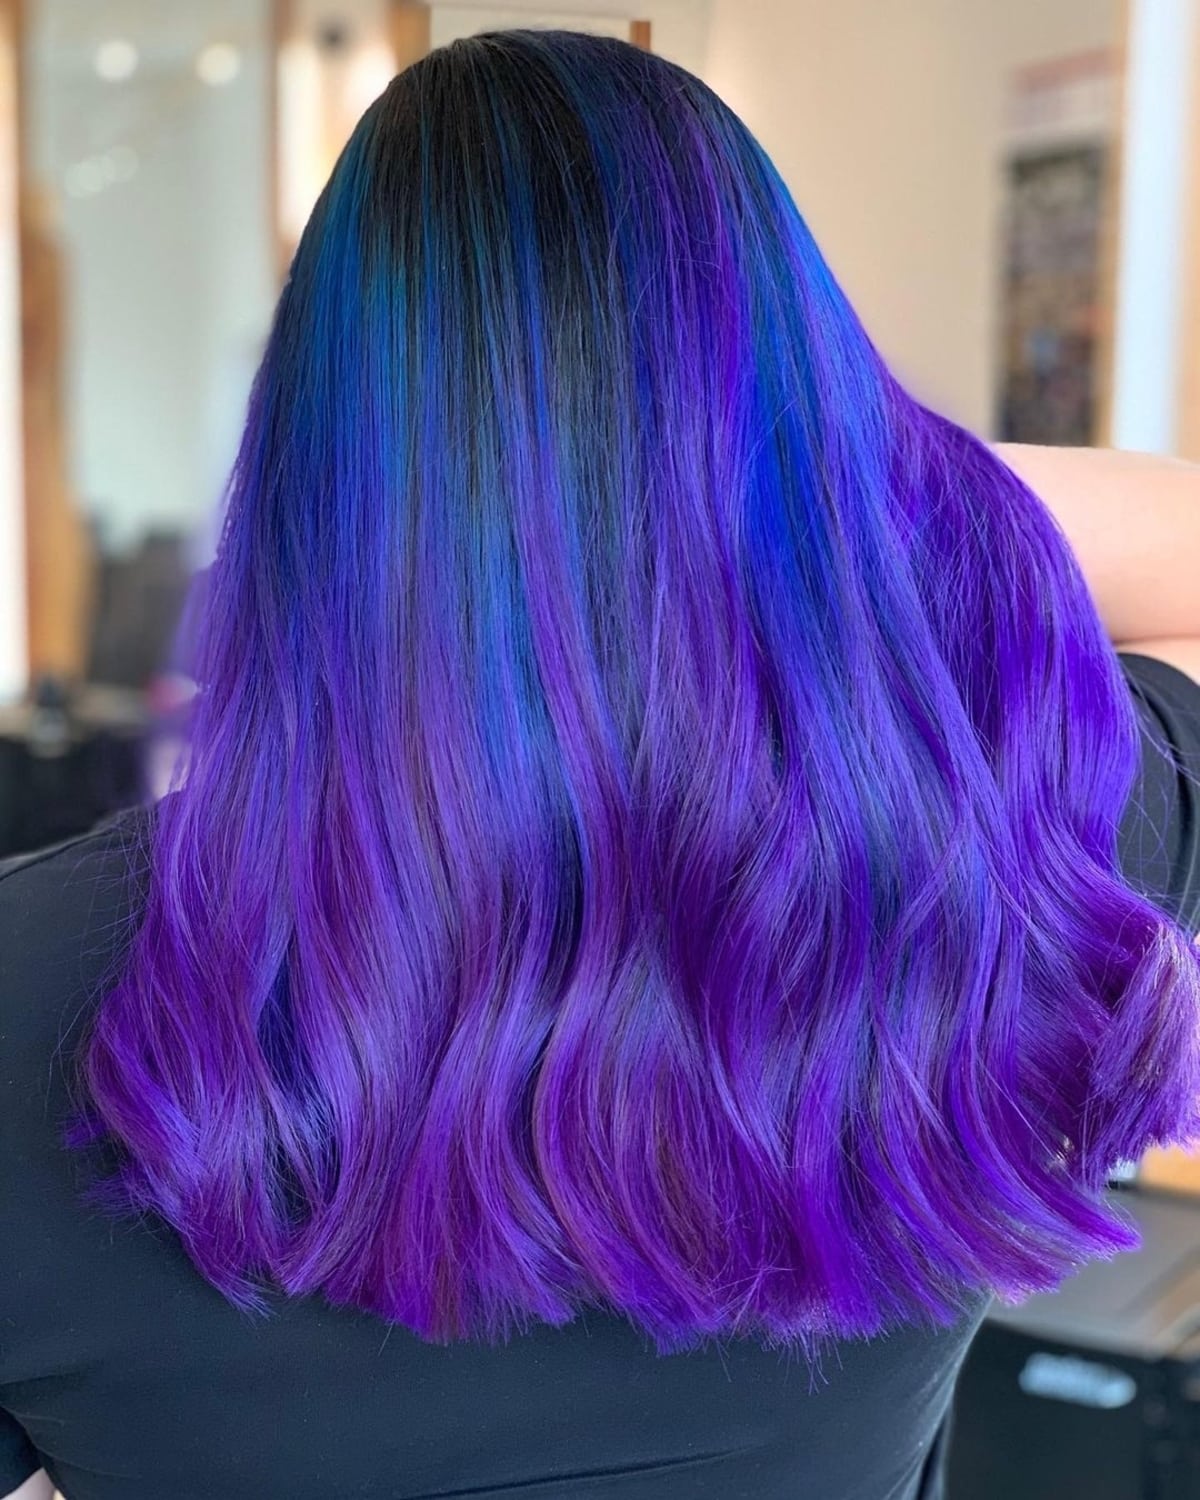 Blue and purple hair color